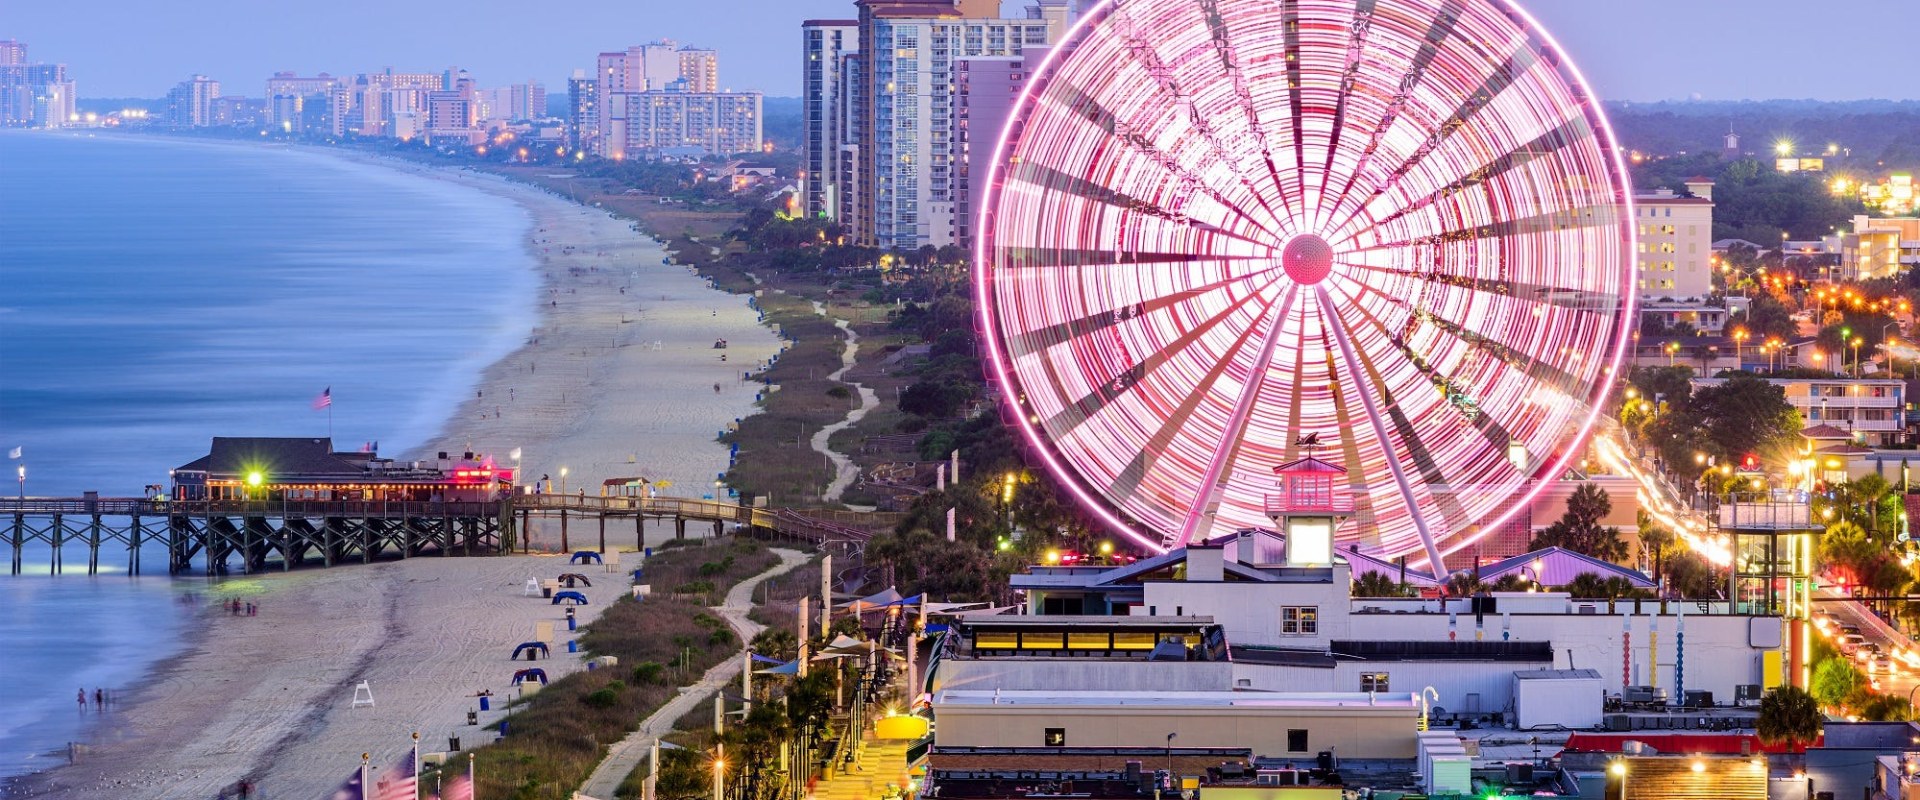 Why is Myrtle Beach So Famous?